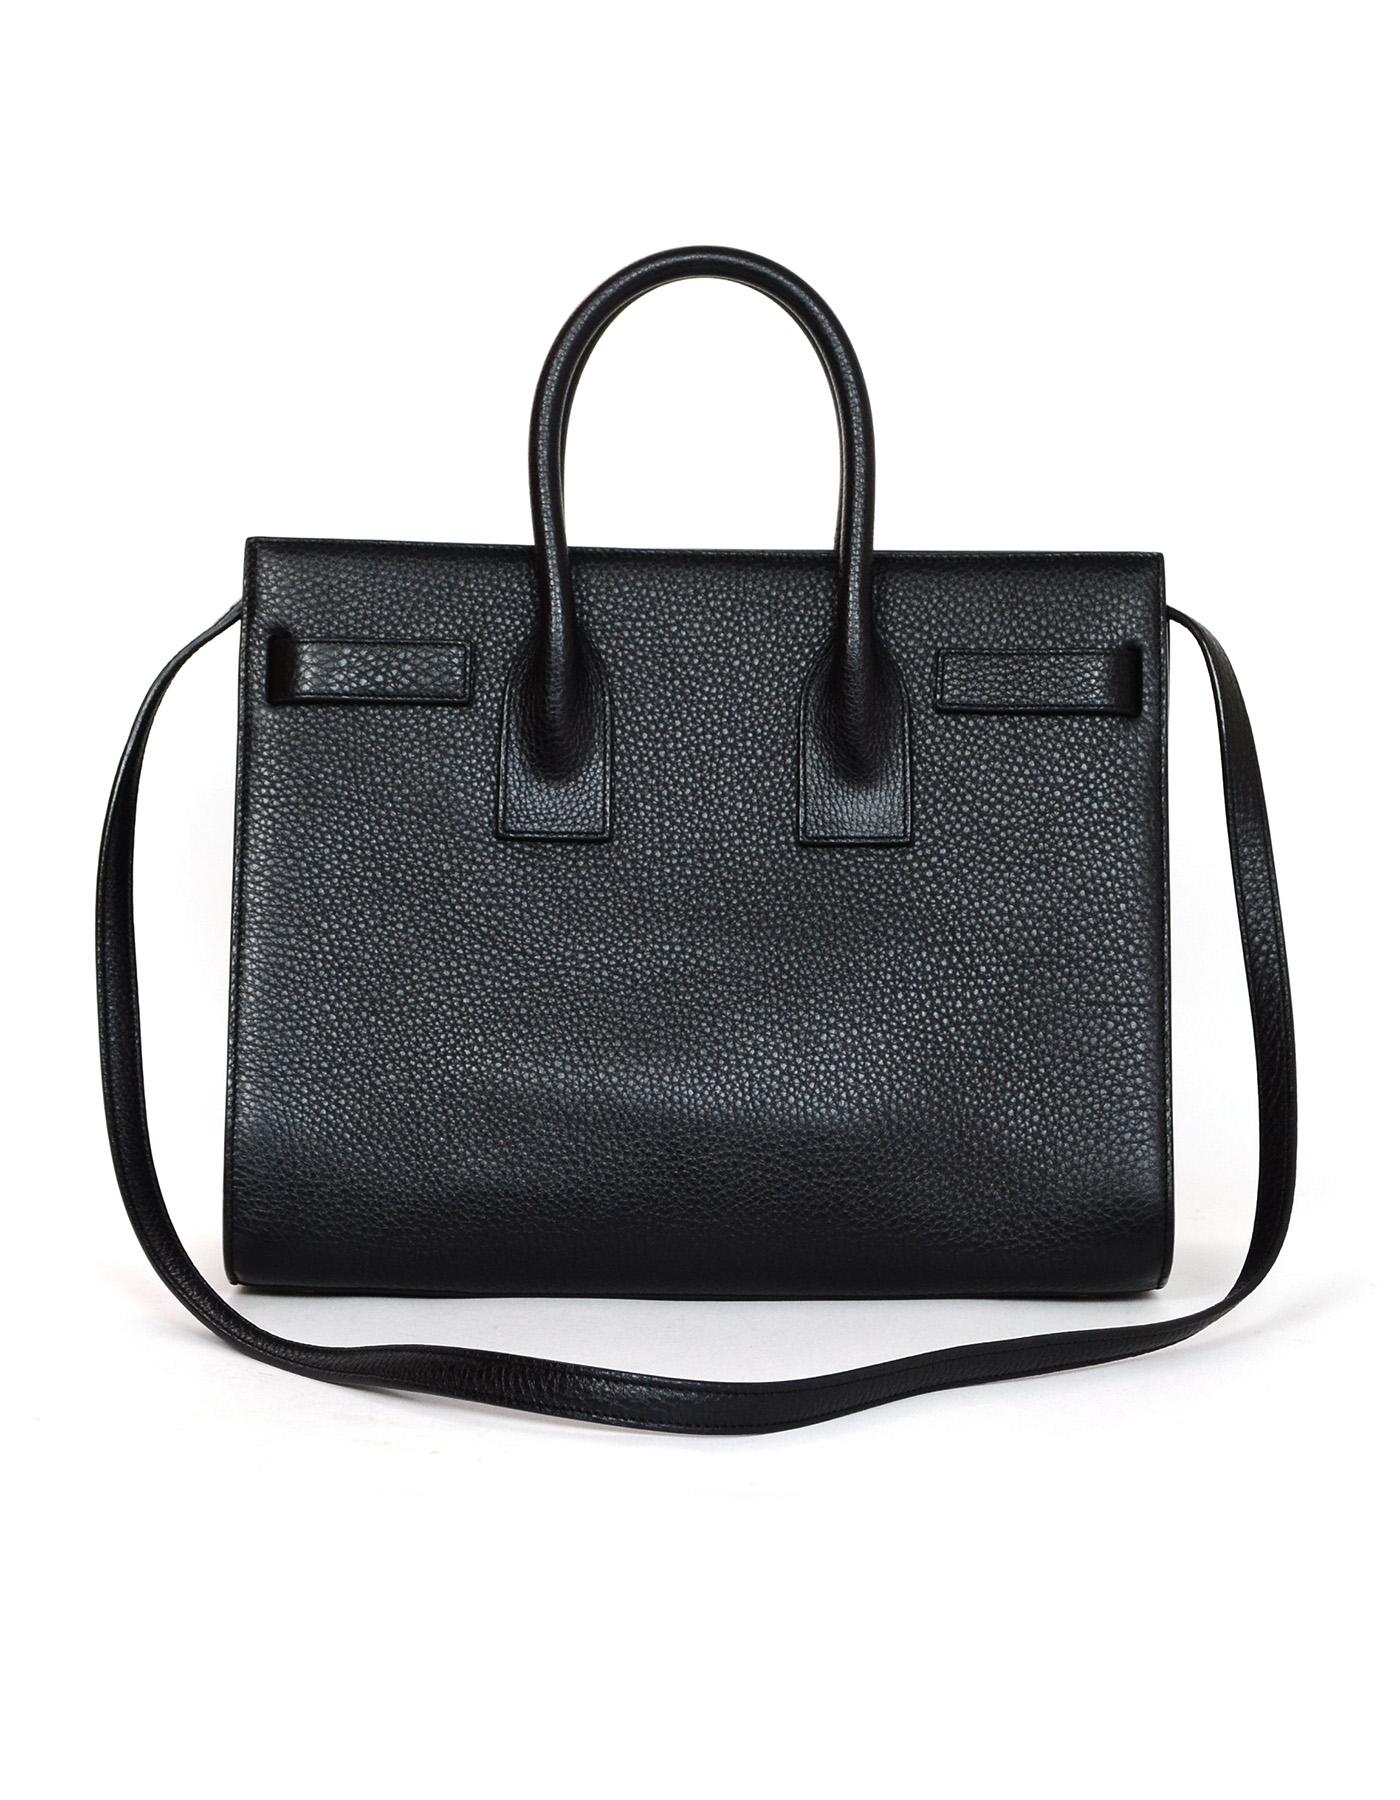 Saint Laurent Black Pebbled Leather Small Sac De Jour Tote W/ Dust Bag In Excellent Condition In New York, NY